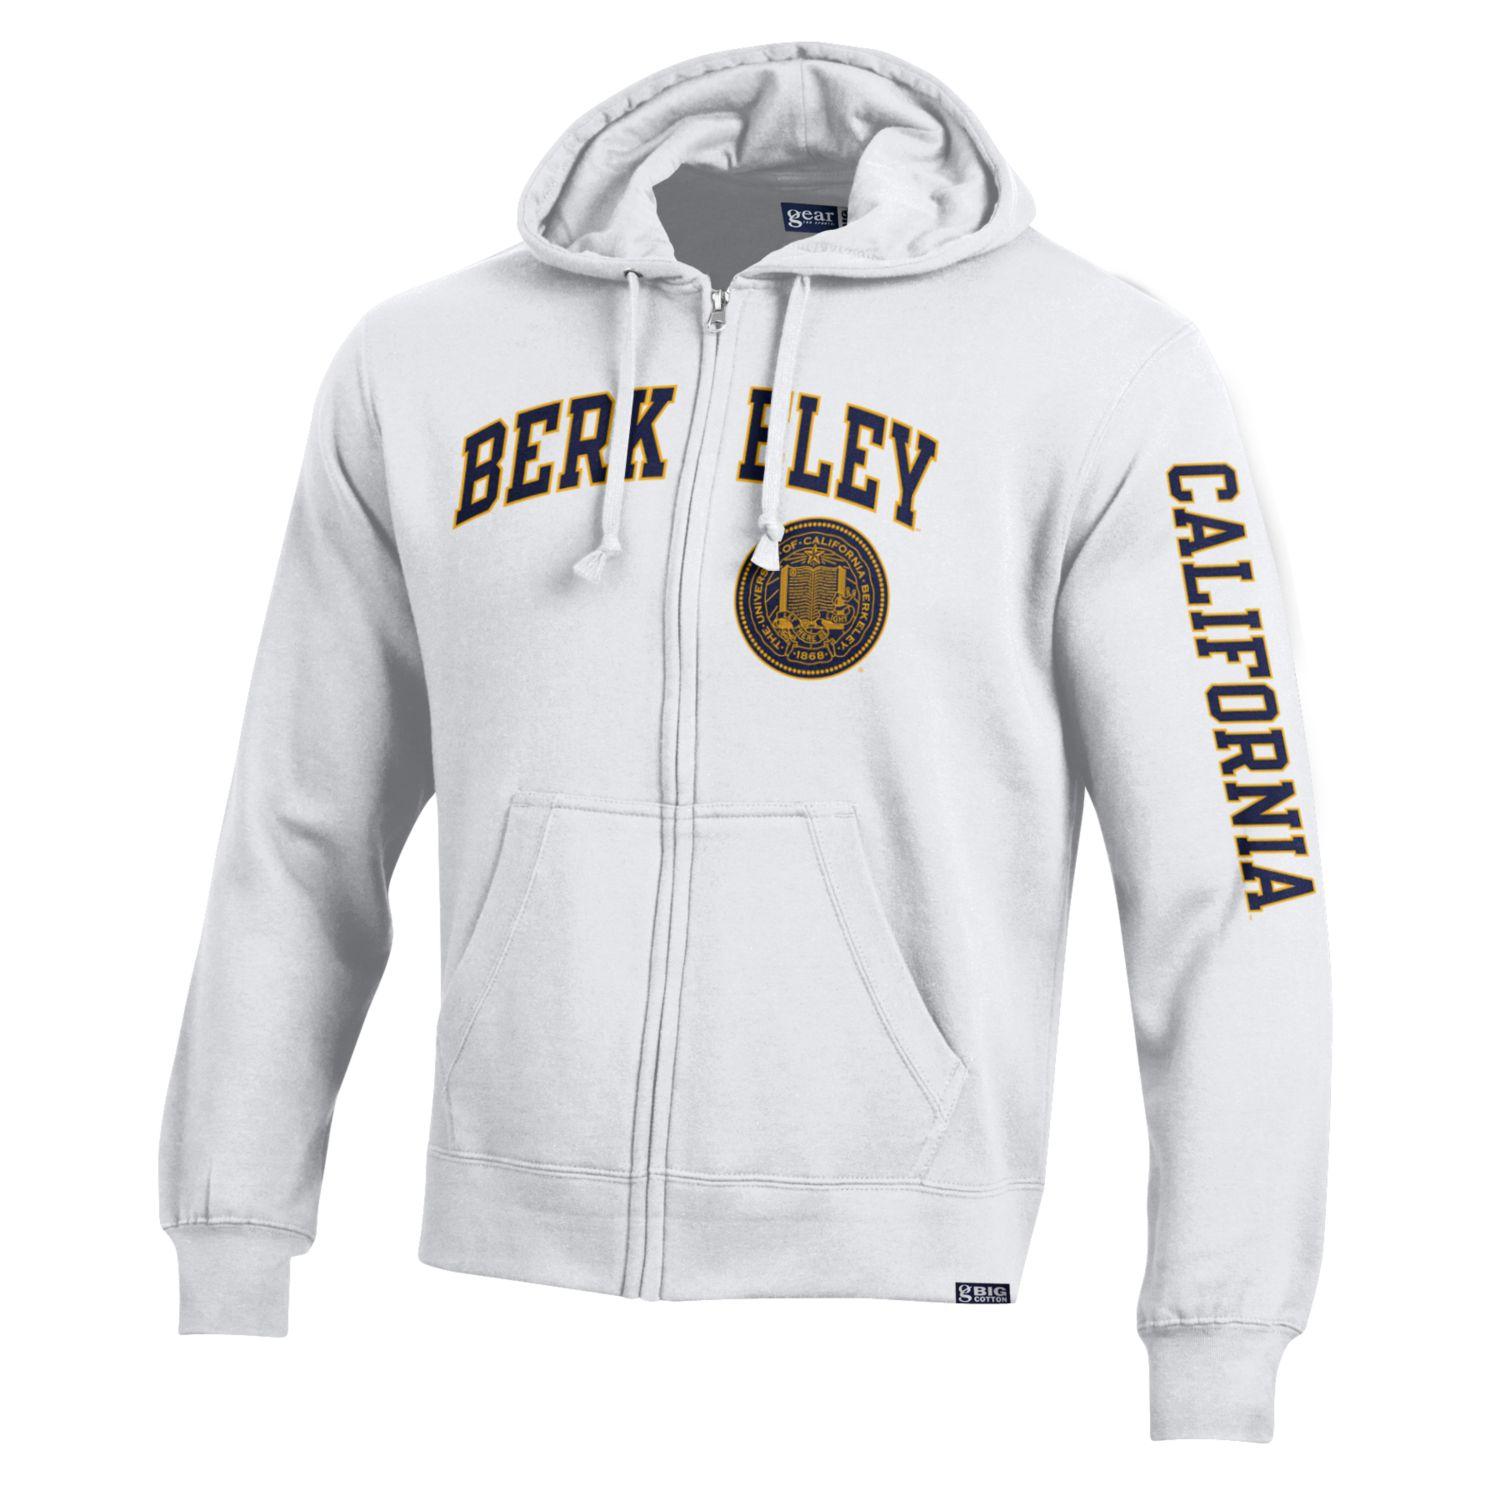 U.C. Berkeley arch and seal with California on the sleeve cotton rich zip-up hoodie sweatshirt- White-Shop College Wear